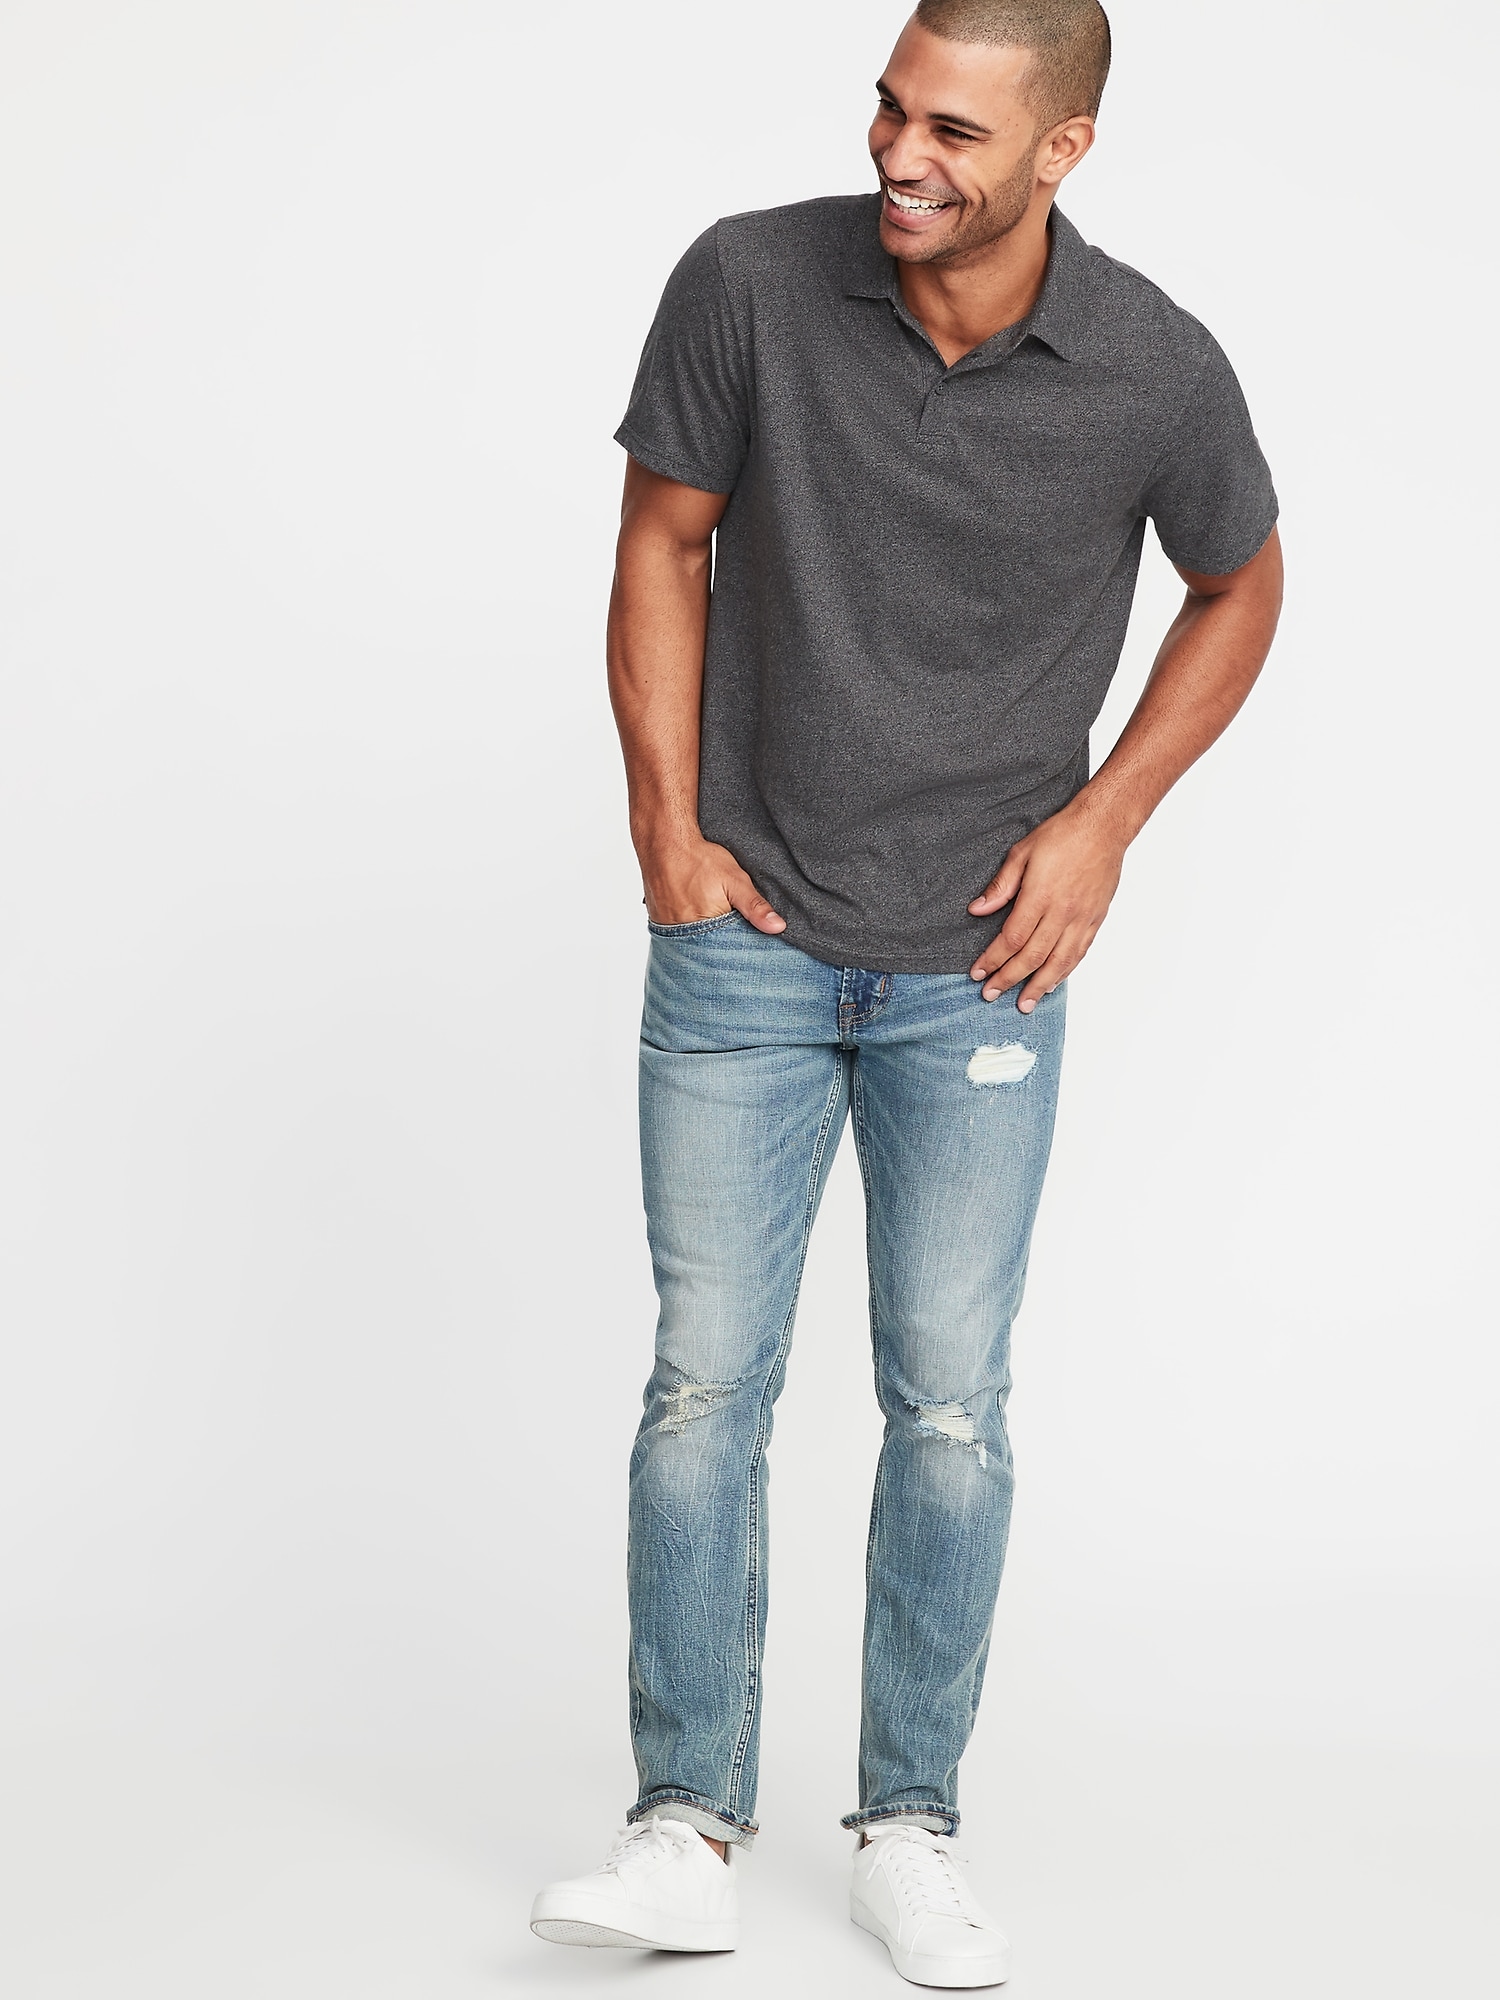 Soft-Washed Jersey Polo for Men | Old Navy